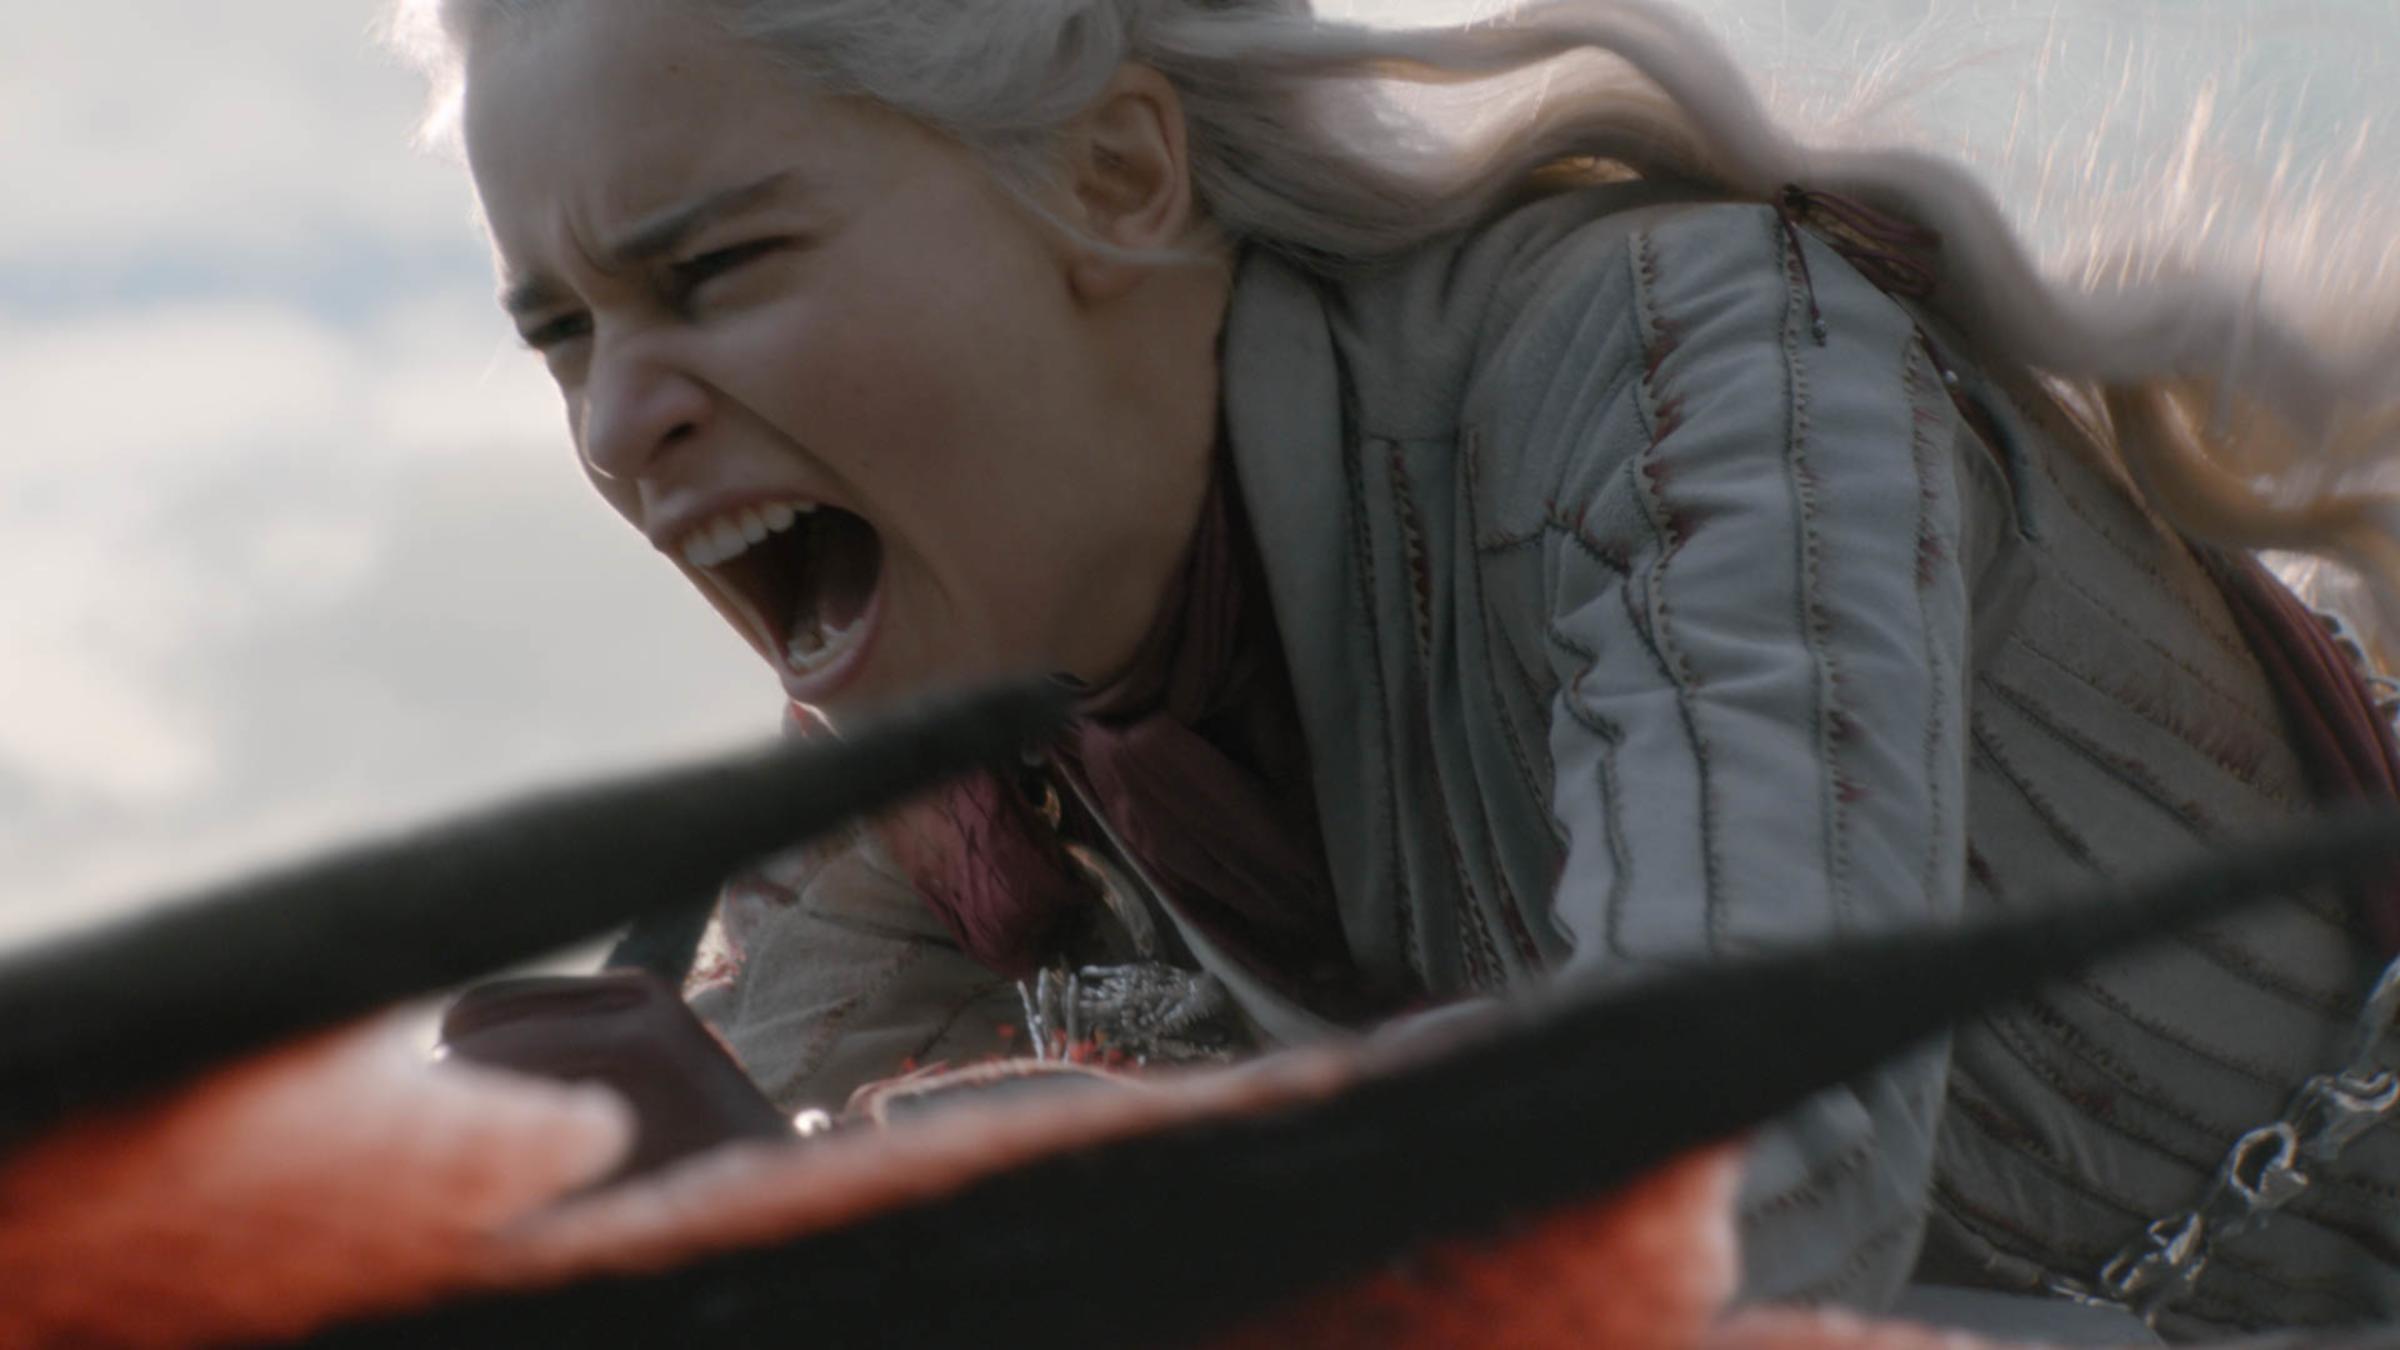 Daenerys rides a dragon during an attack on Game of Thrones